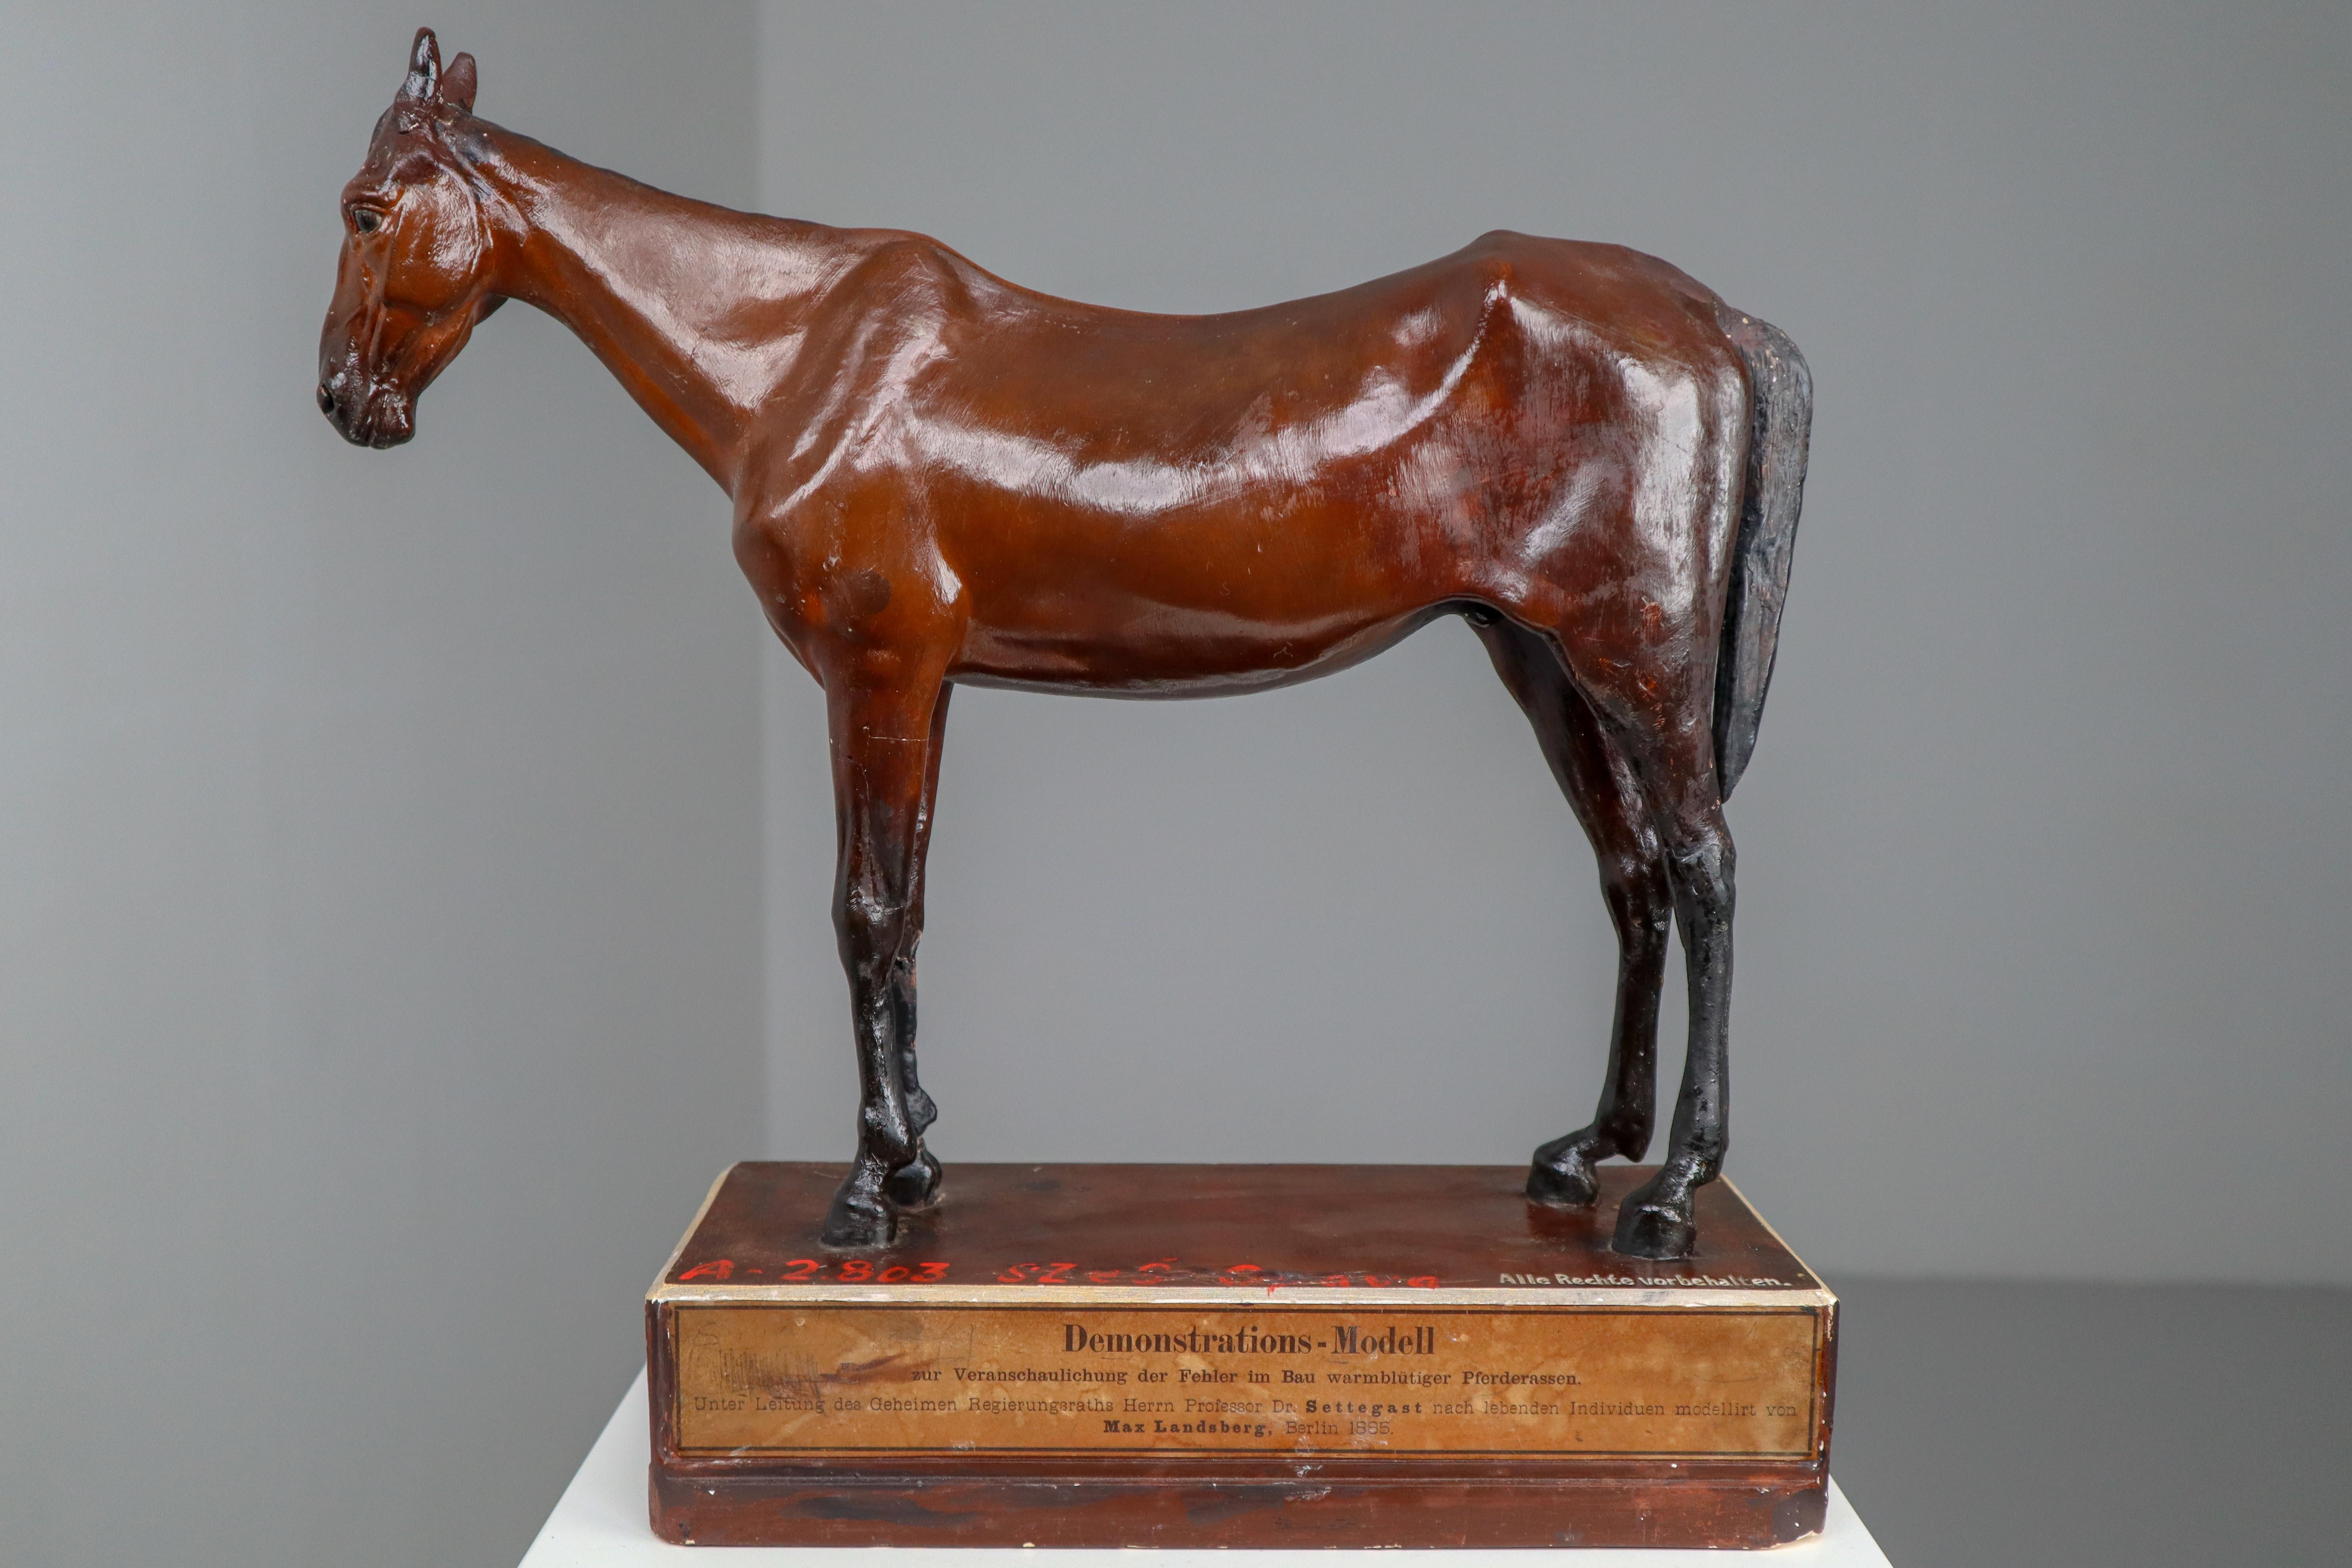 Warm-Blooded Horse Model in Painted Plaster by Max Landsberg, Berlin, 1885 1